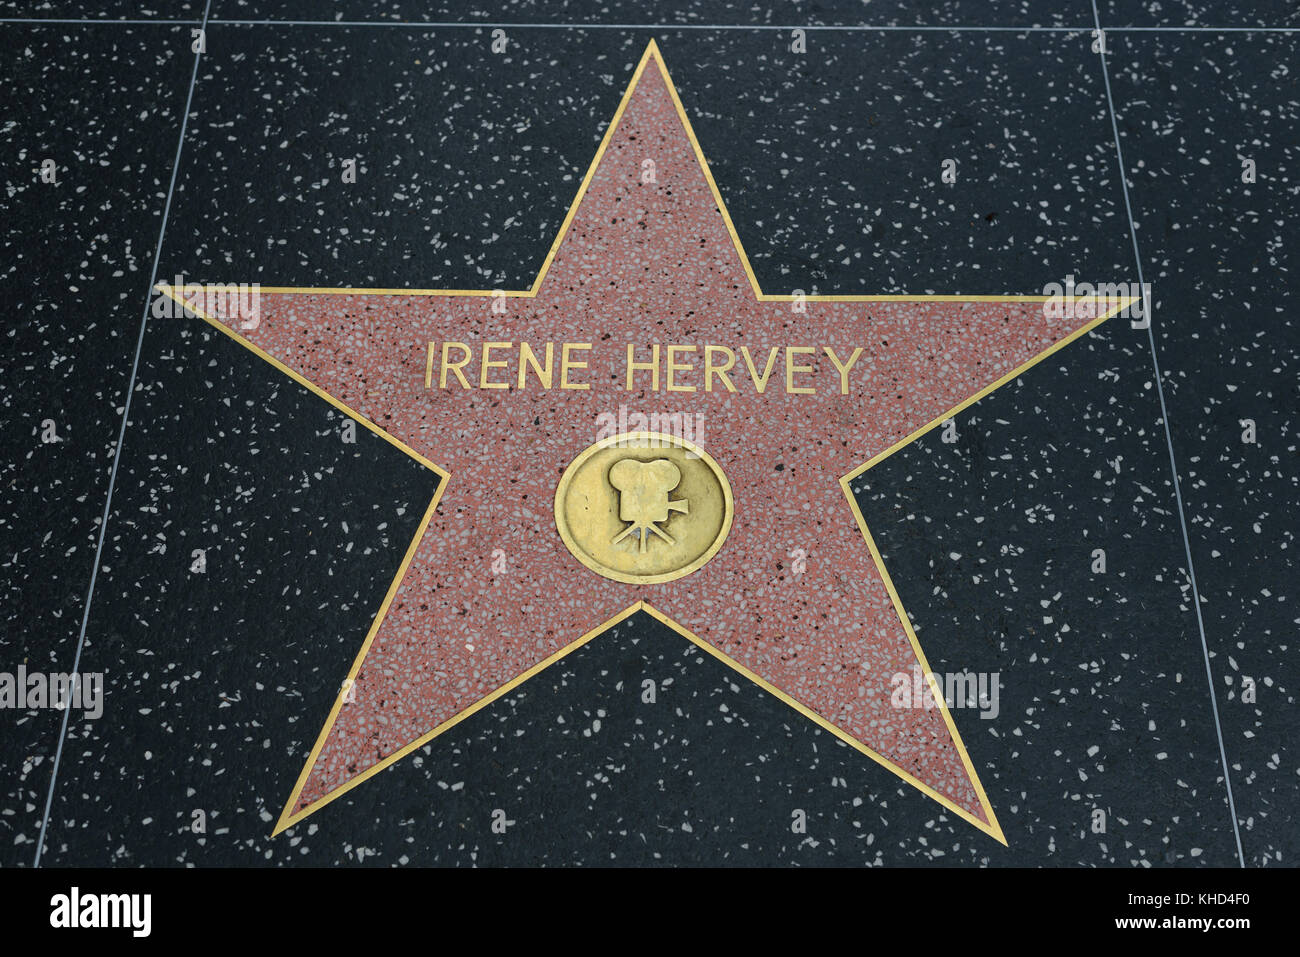 HOLLYWOOD, CA - DECEMBER 06: Irene Hervey star on the Hollywood Walk of Fame in Hollywood, California on Dec. 6, 2016. Stock Photo